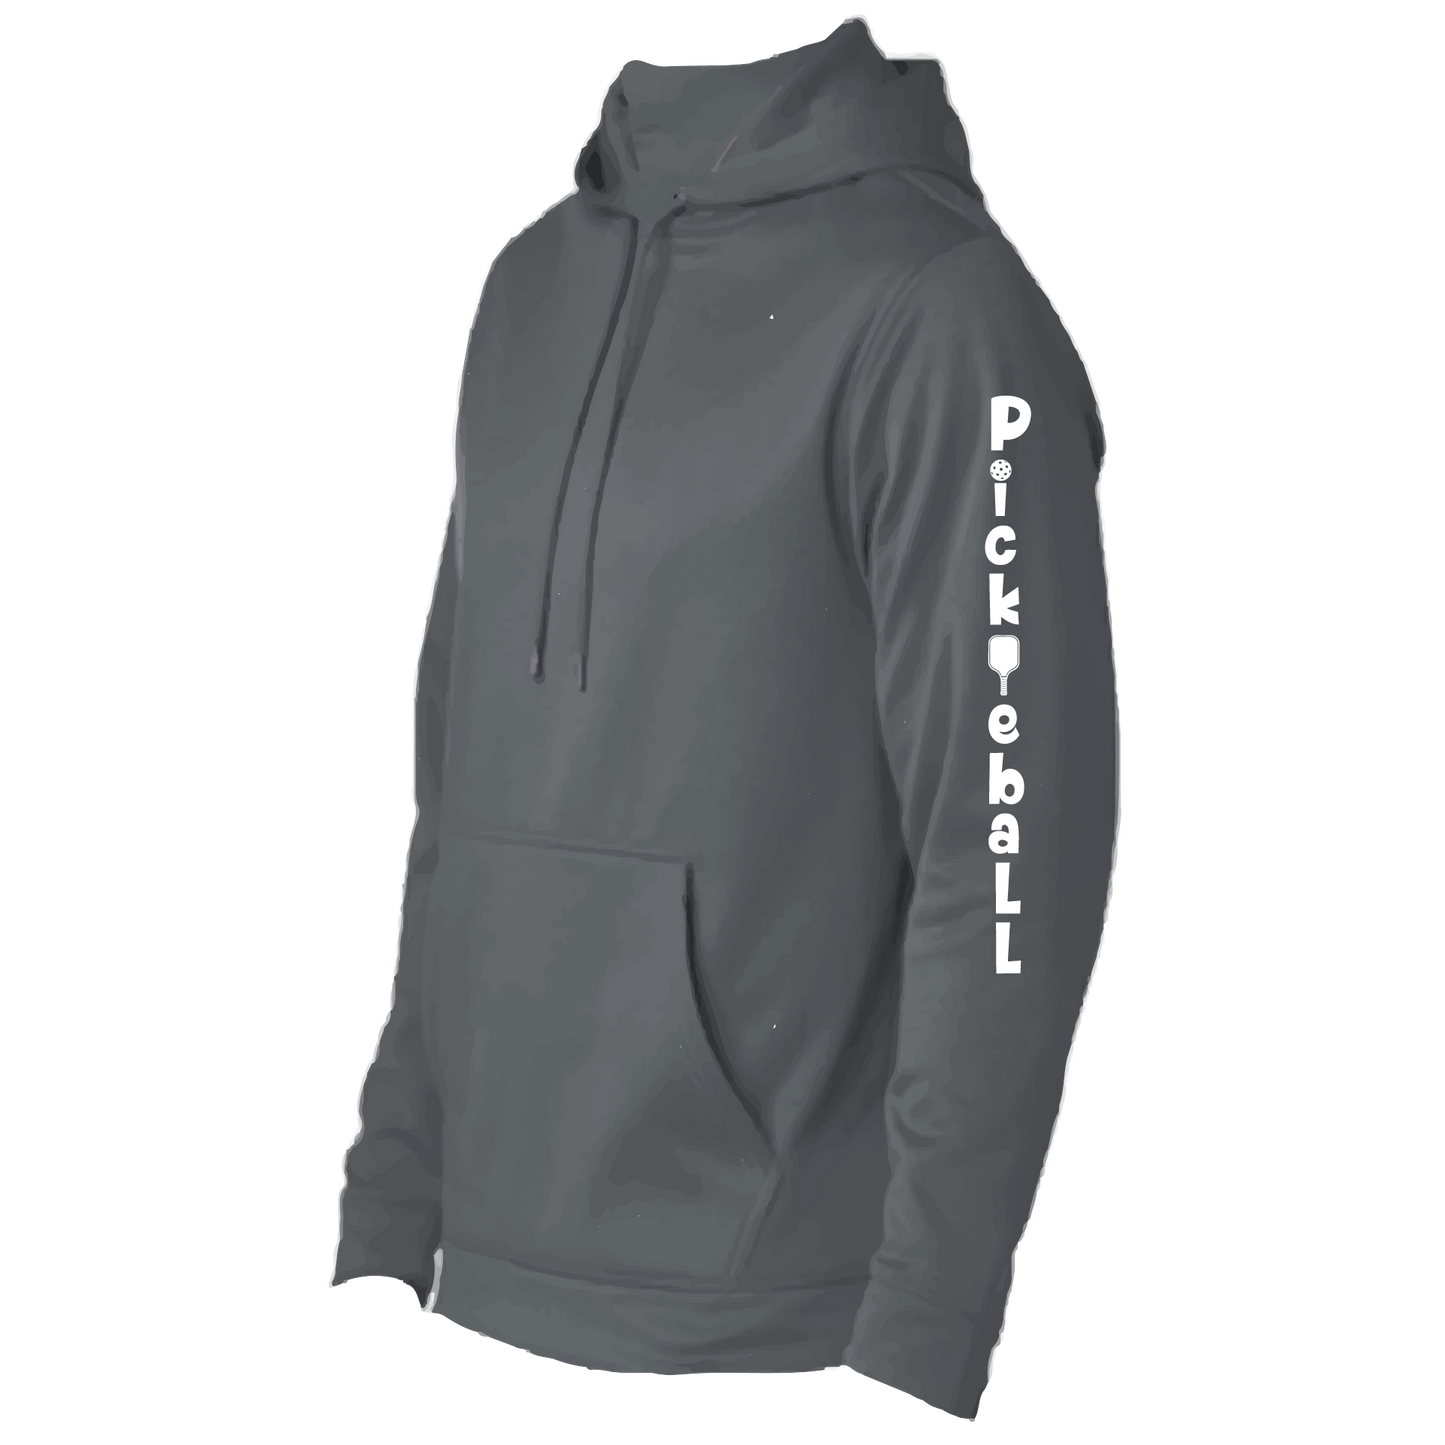 Pickleball Design: Pickleball Vertical (Customizable Location)  Unisex Hooded Sweatshirt: Moisture-wicking, double-lined hood, front pouch pocket.  This unisex hooded sweatshirt is ultra comfortable and soft. Stay warm on the Pickleball courts while being that hit with this one of kind design.